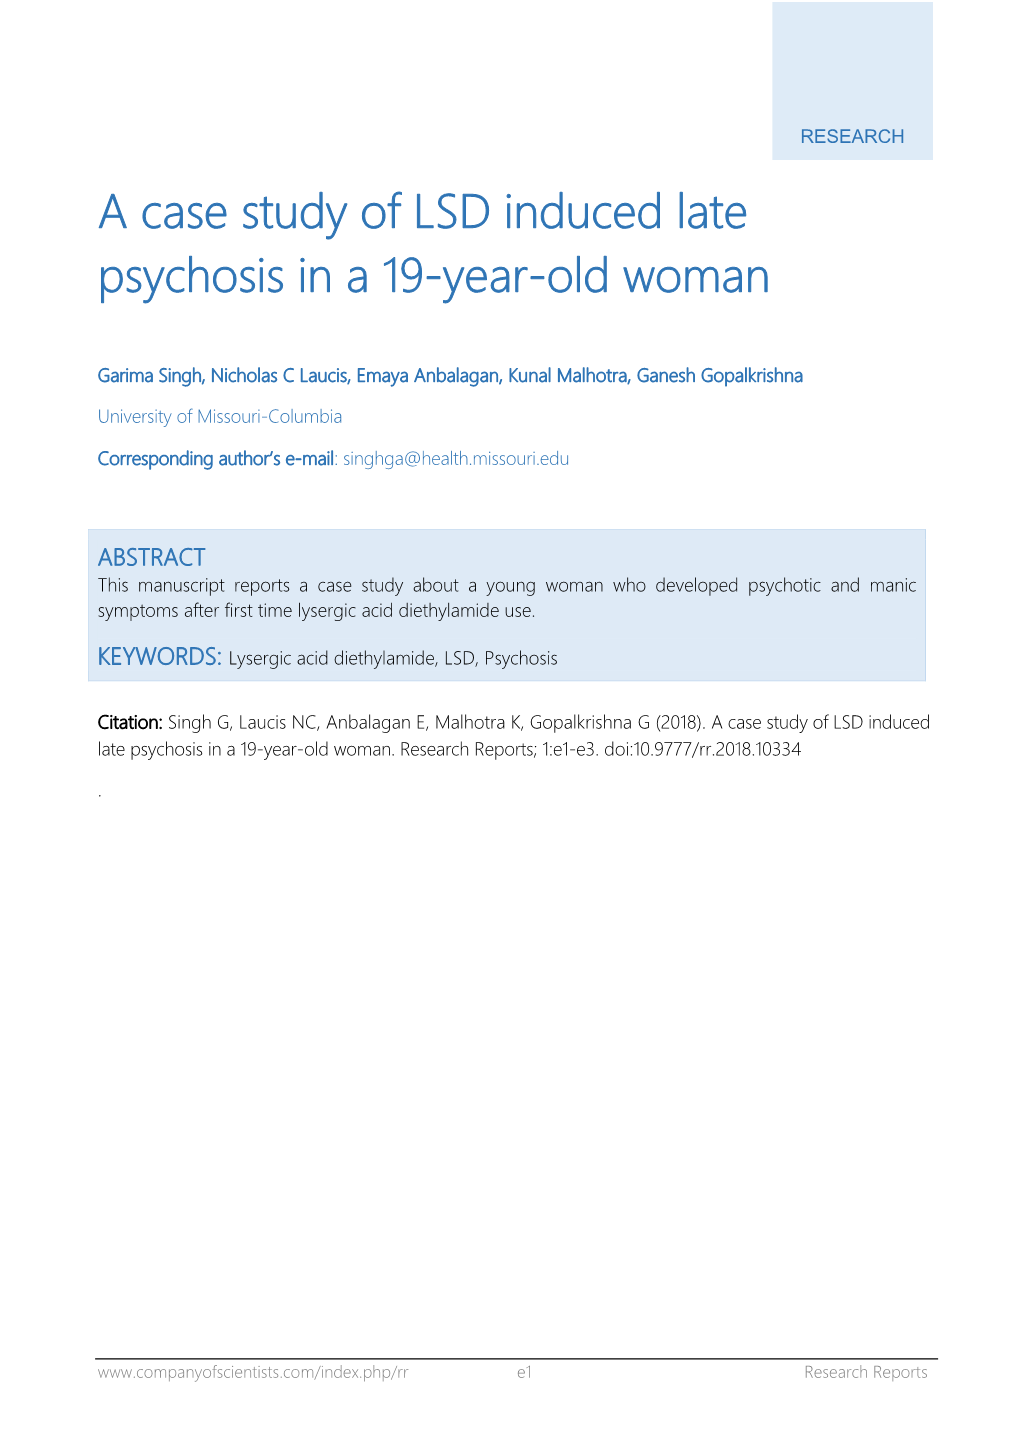 A Case Study of LSD Induced Late Psychosis in a 19-Year-Old Woman